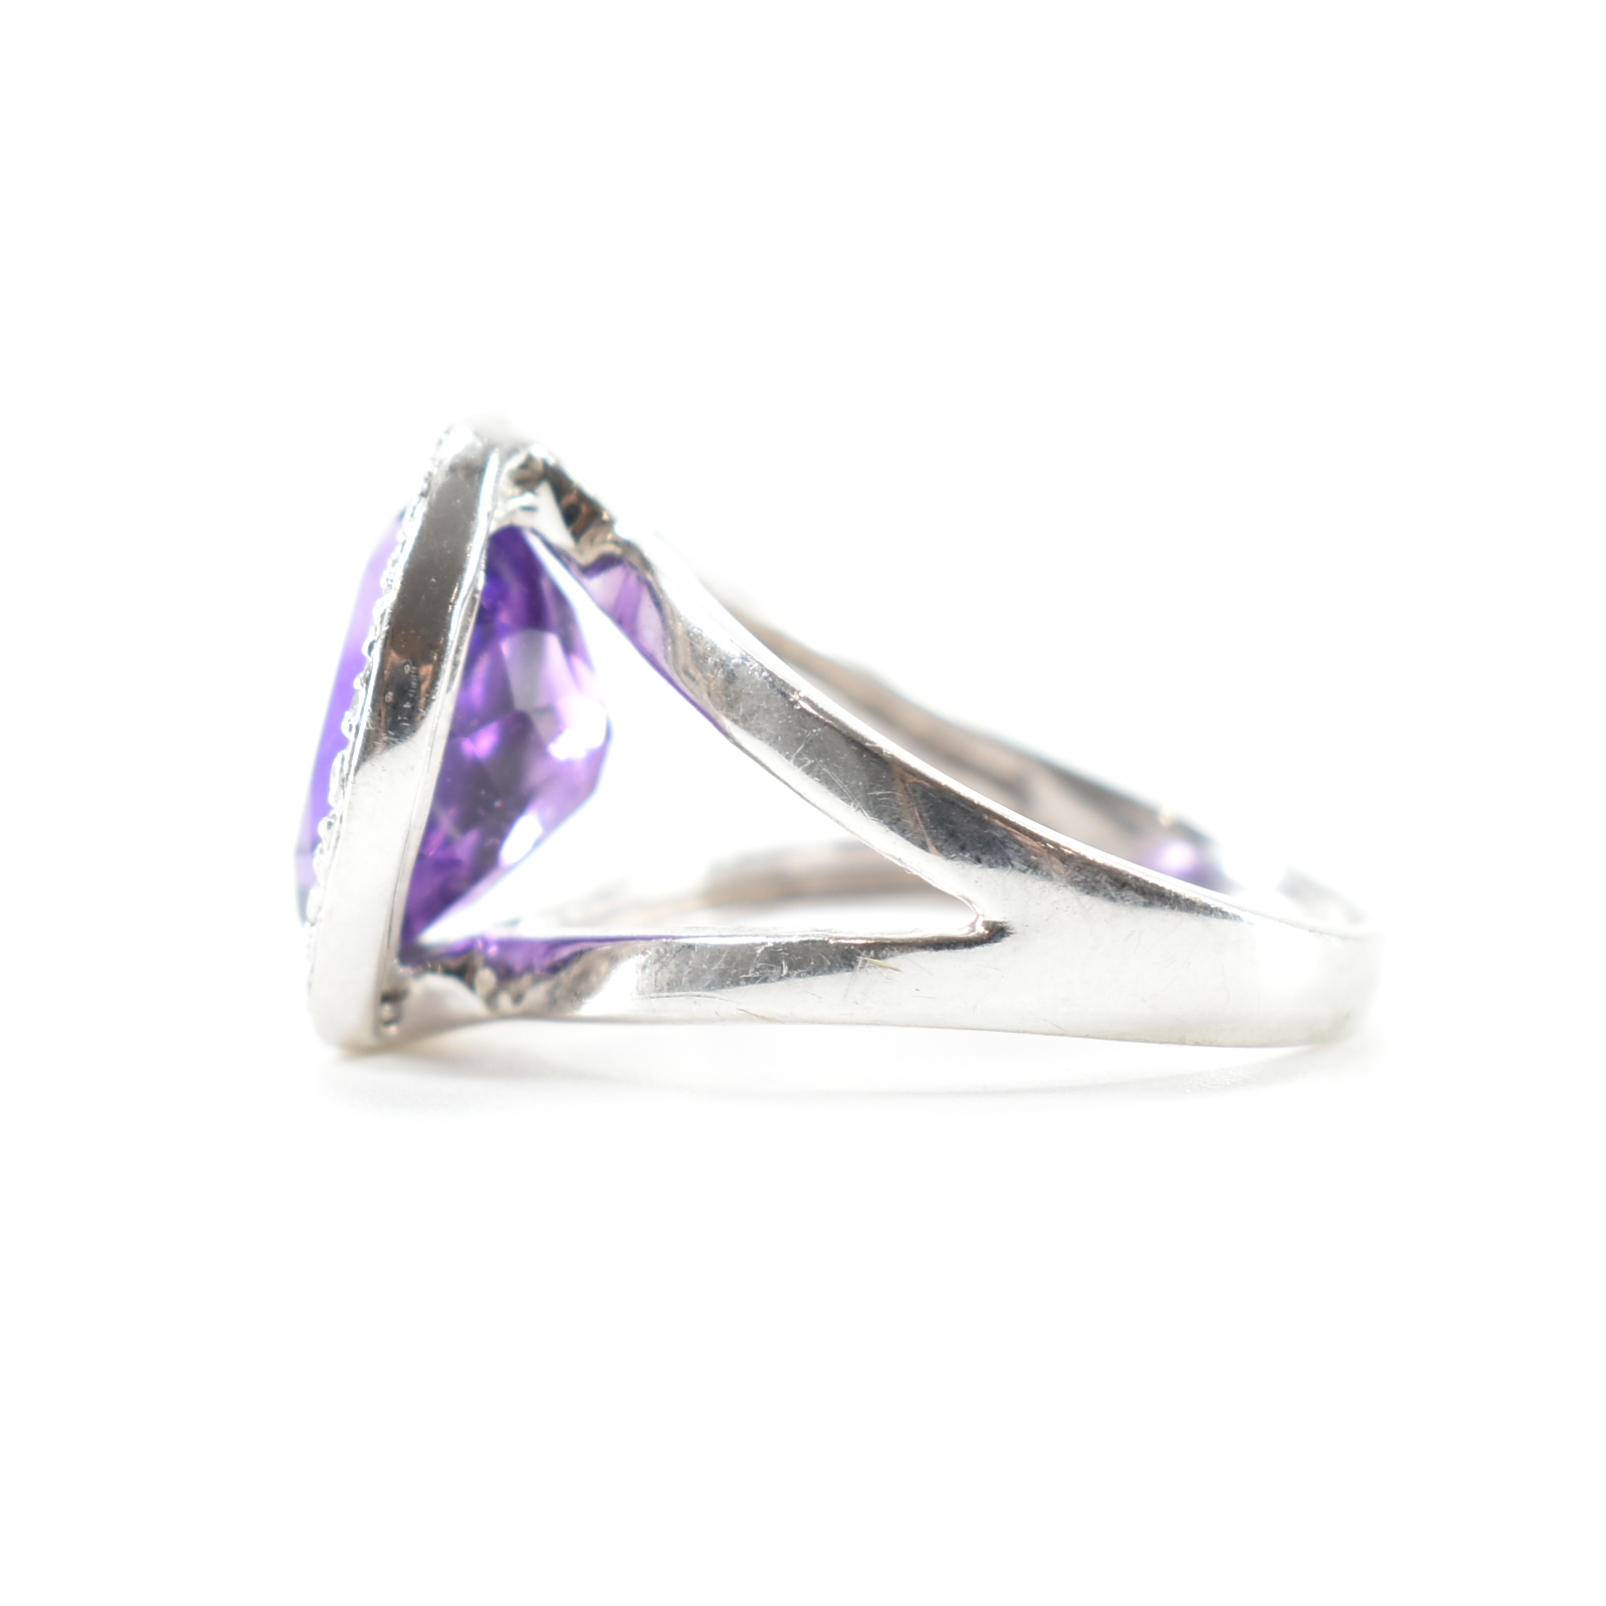 FRENCH 18CT WHITE GOLD AMETHYST & DIAMOND COCKTAIL RING - Image 2 of 9